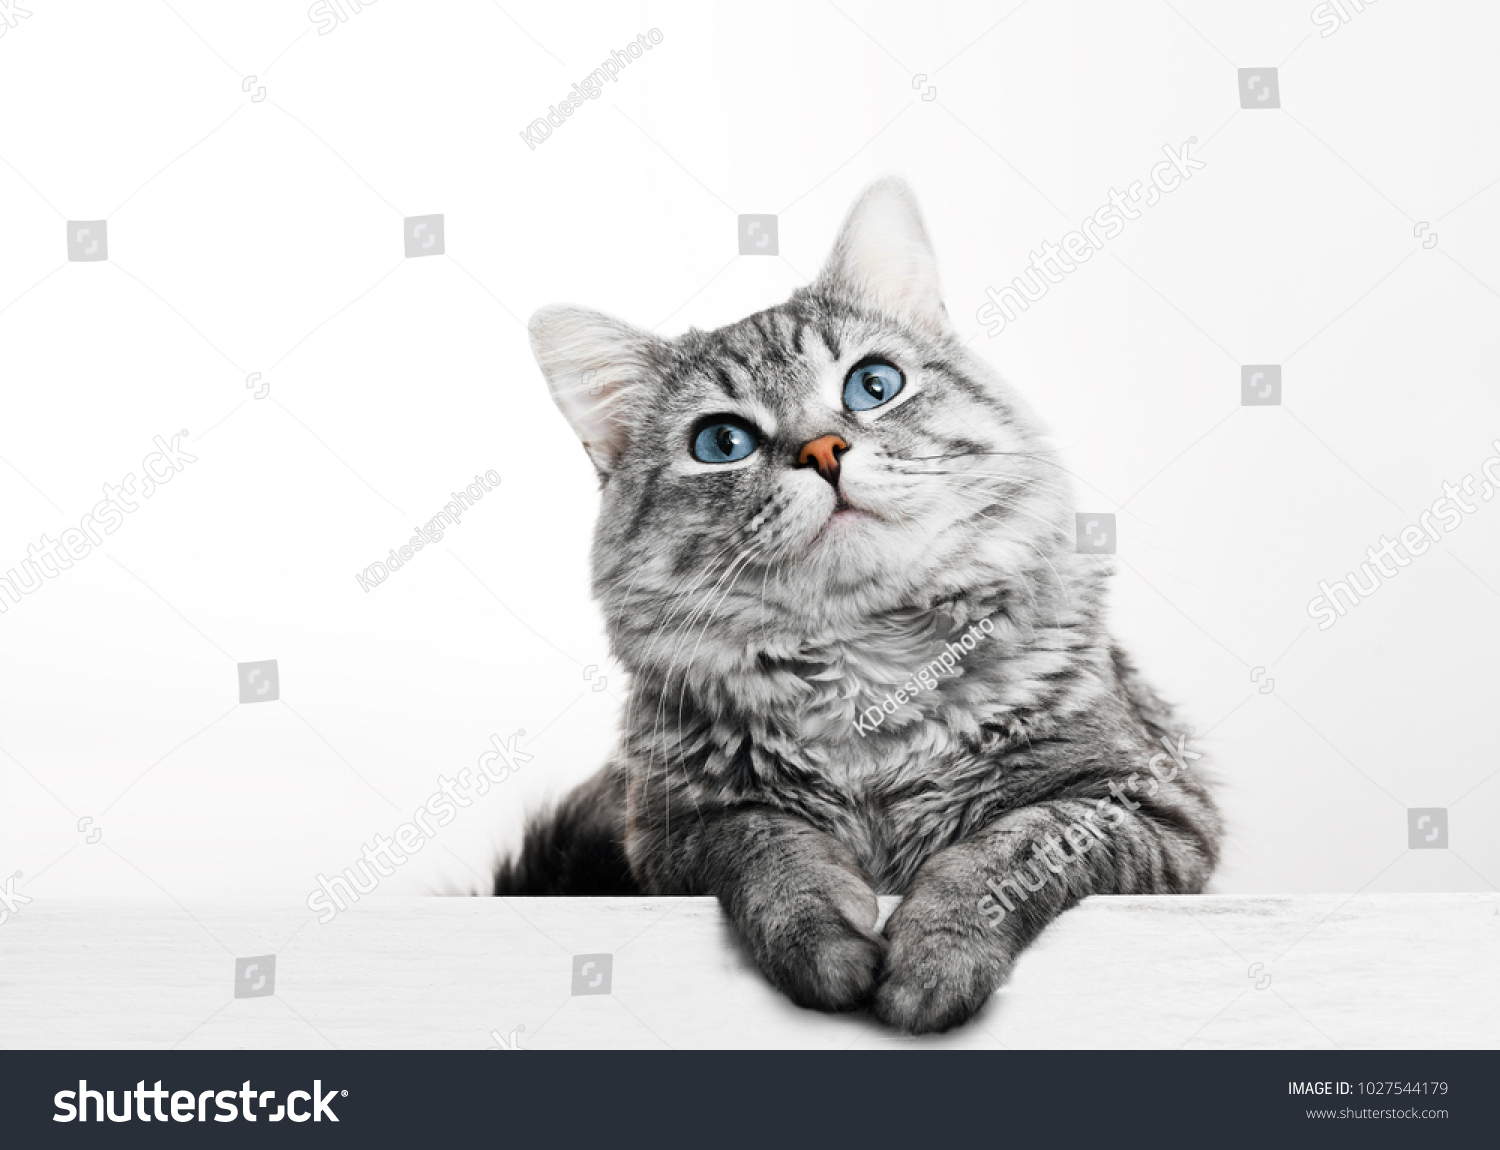 Close up view of Gray tabby cute kitten with blue eyes. Pets and lifestyle concept. Lovely fluffy cat on grey background. #1027544179